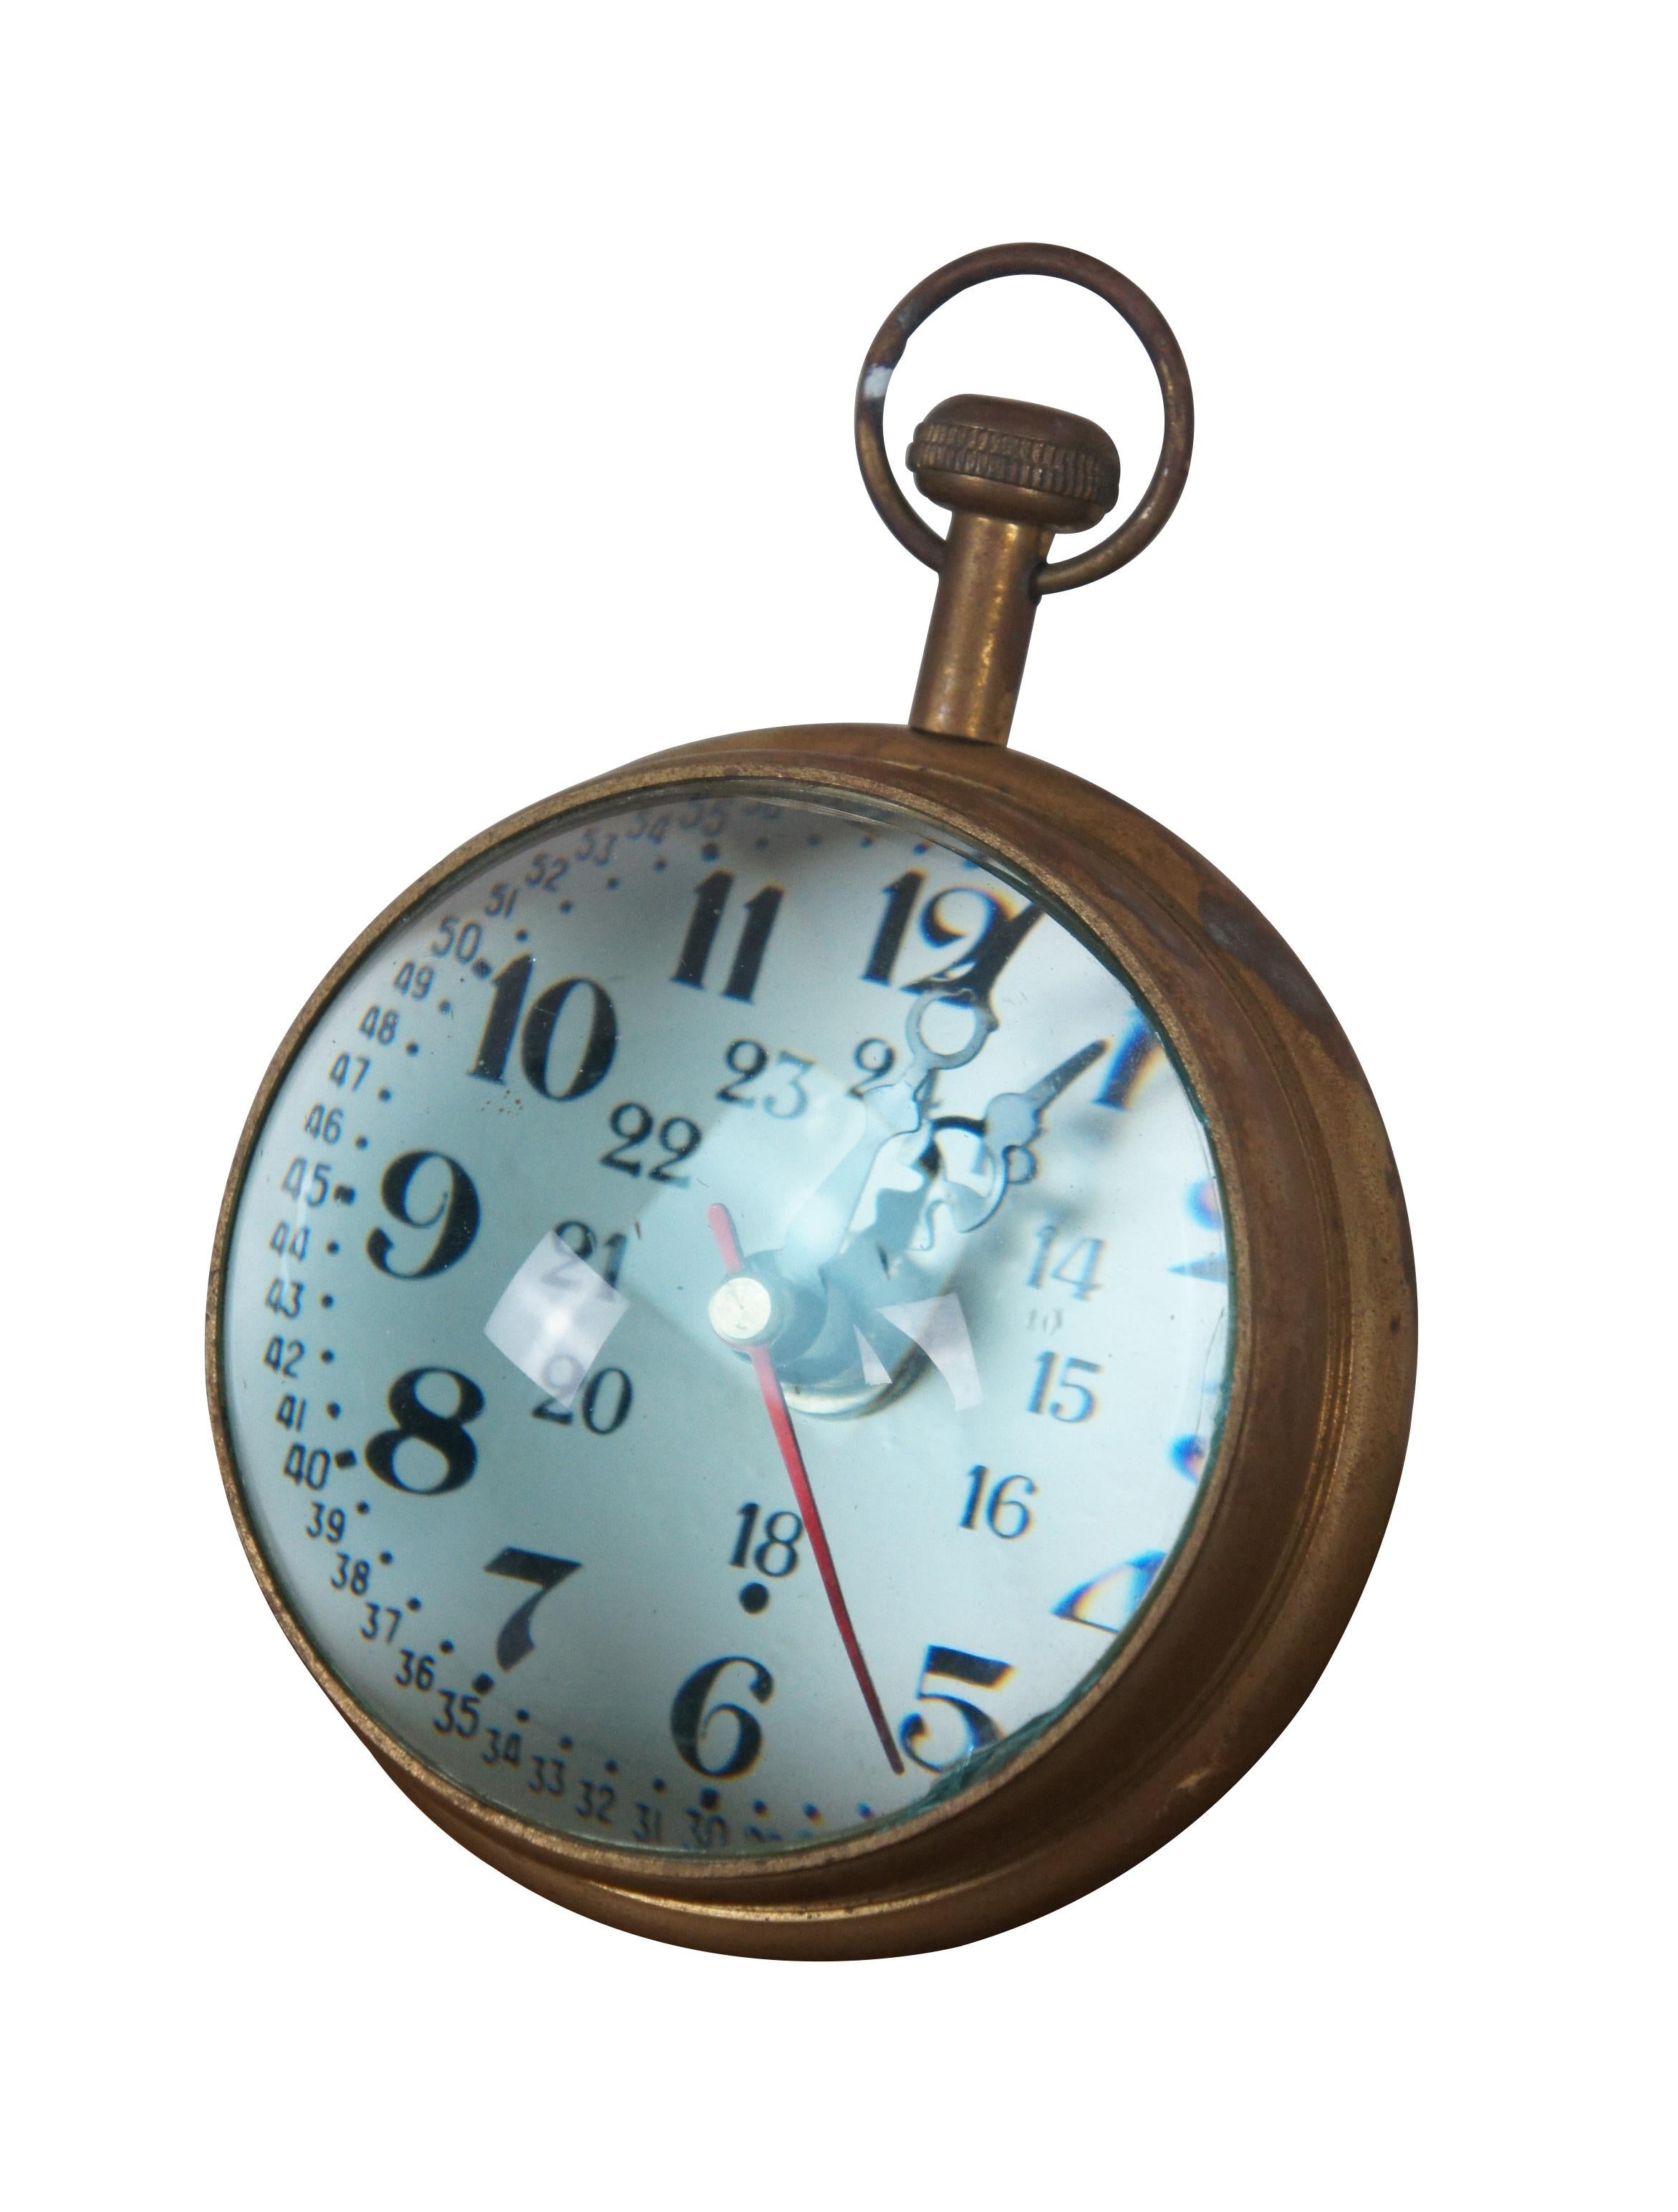 Late 20th century desk clock, crafted in the shape of a Marine pocket watch with brass frame and domes of magnifying glass on the front and back. White face with Arabic numerals, including seconds and 24 hour time. Made in India. M2188 Quartz